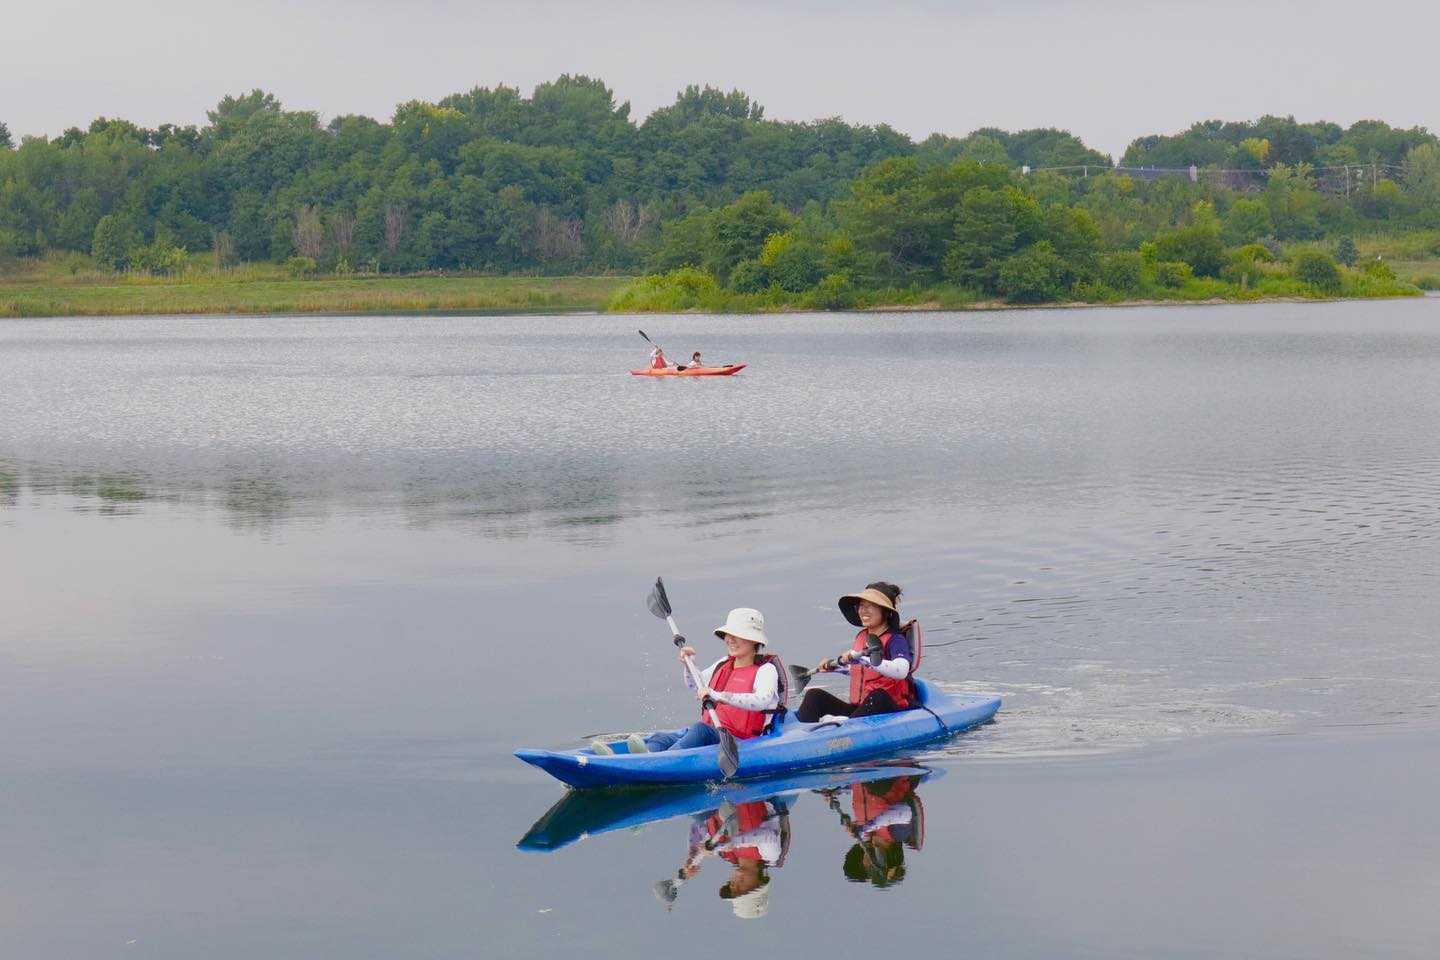 Kayak with us at Whalon Lake! This beautiful 82-acre landscape located on the edge of Naperville and Bolingbrook is perfect for kayakers at any level. Book with us Thursday-Sunday at www.napervillekayak.com.